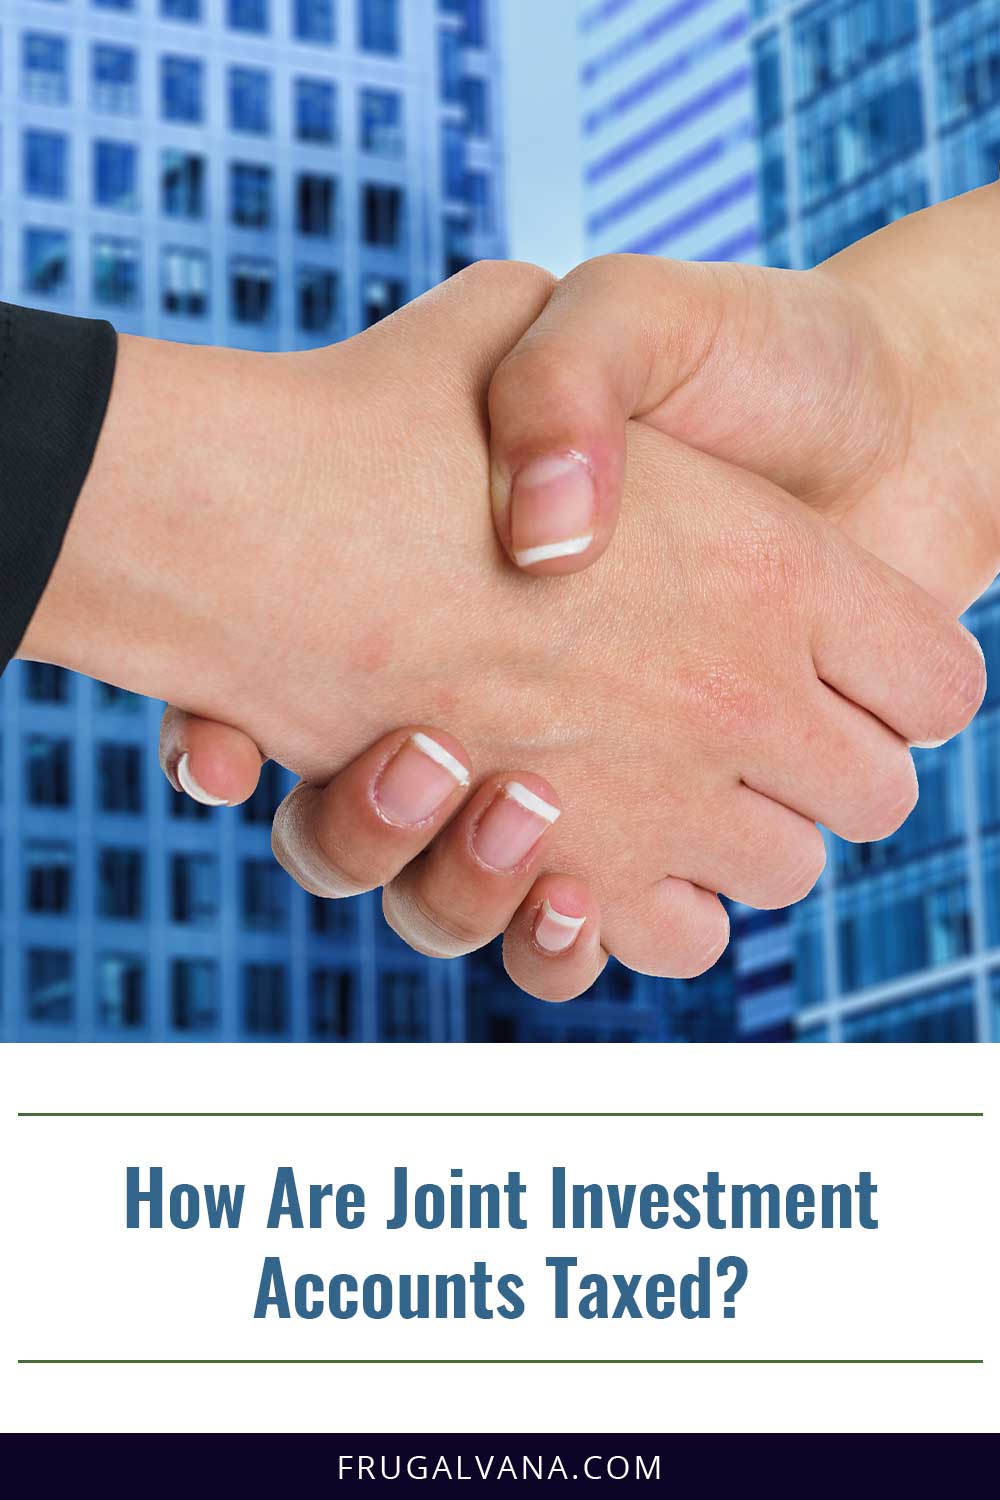 Two hands shaking - How Are Joint Investment Accounts Taxed?